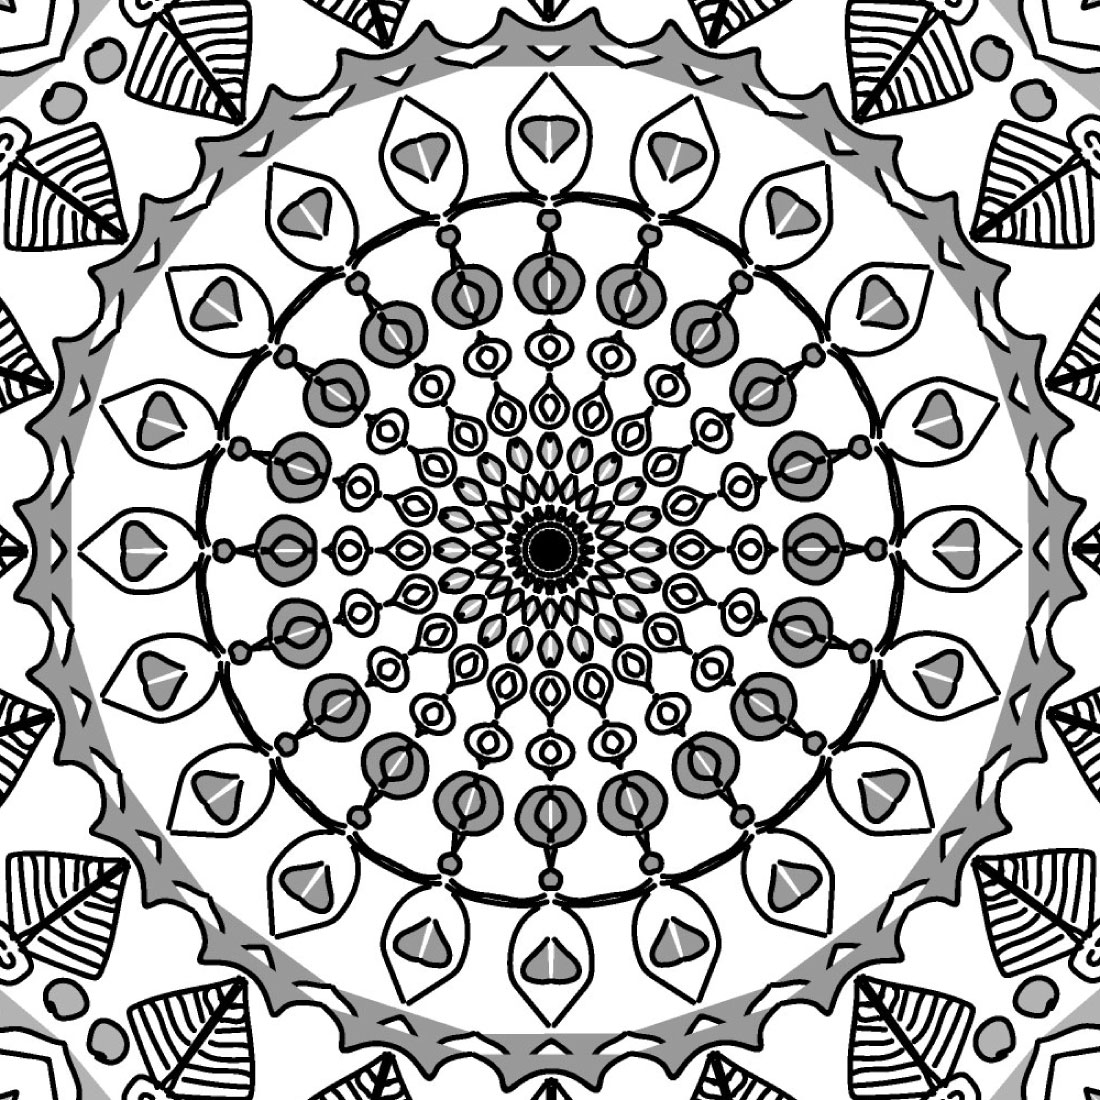 Mandala art with black and gray preview image.